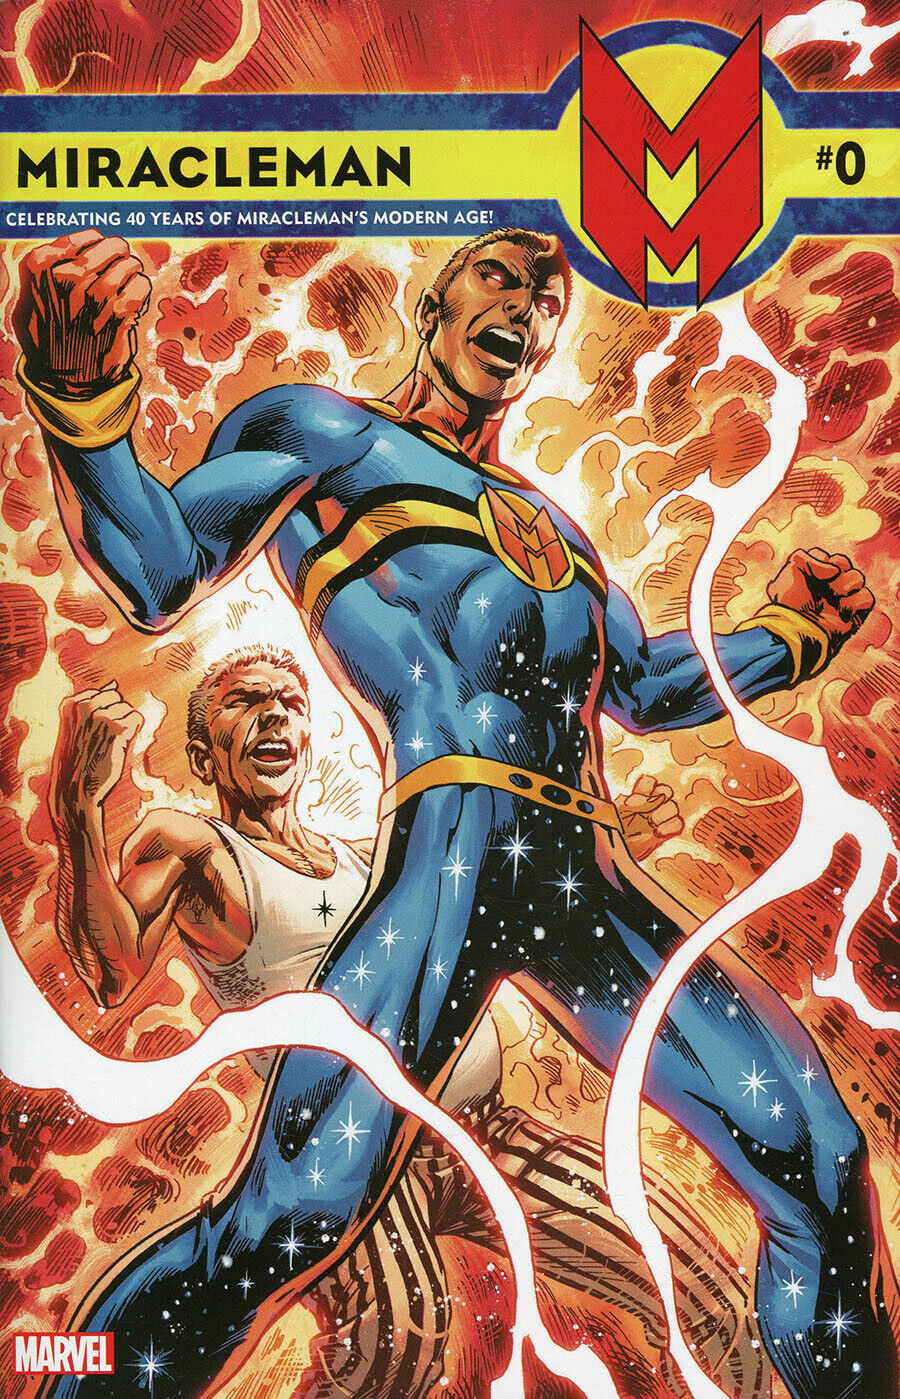 MIRACLEMAN: THE SILVER AGE SERIES LISTING (#0-7 AVAILABLE/GAIMAN/BUCKINGHAM)